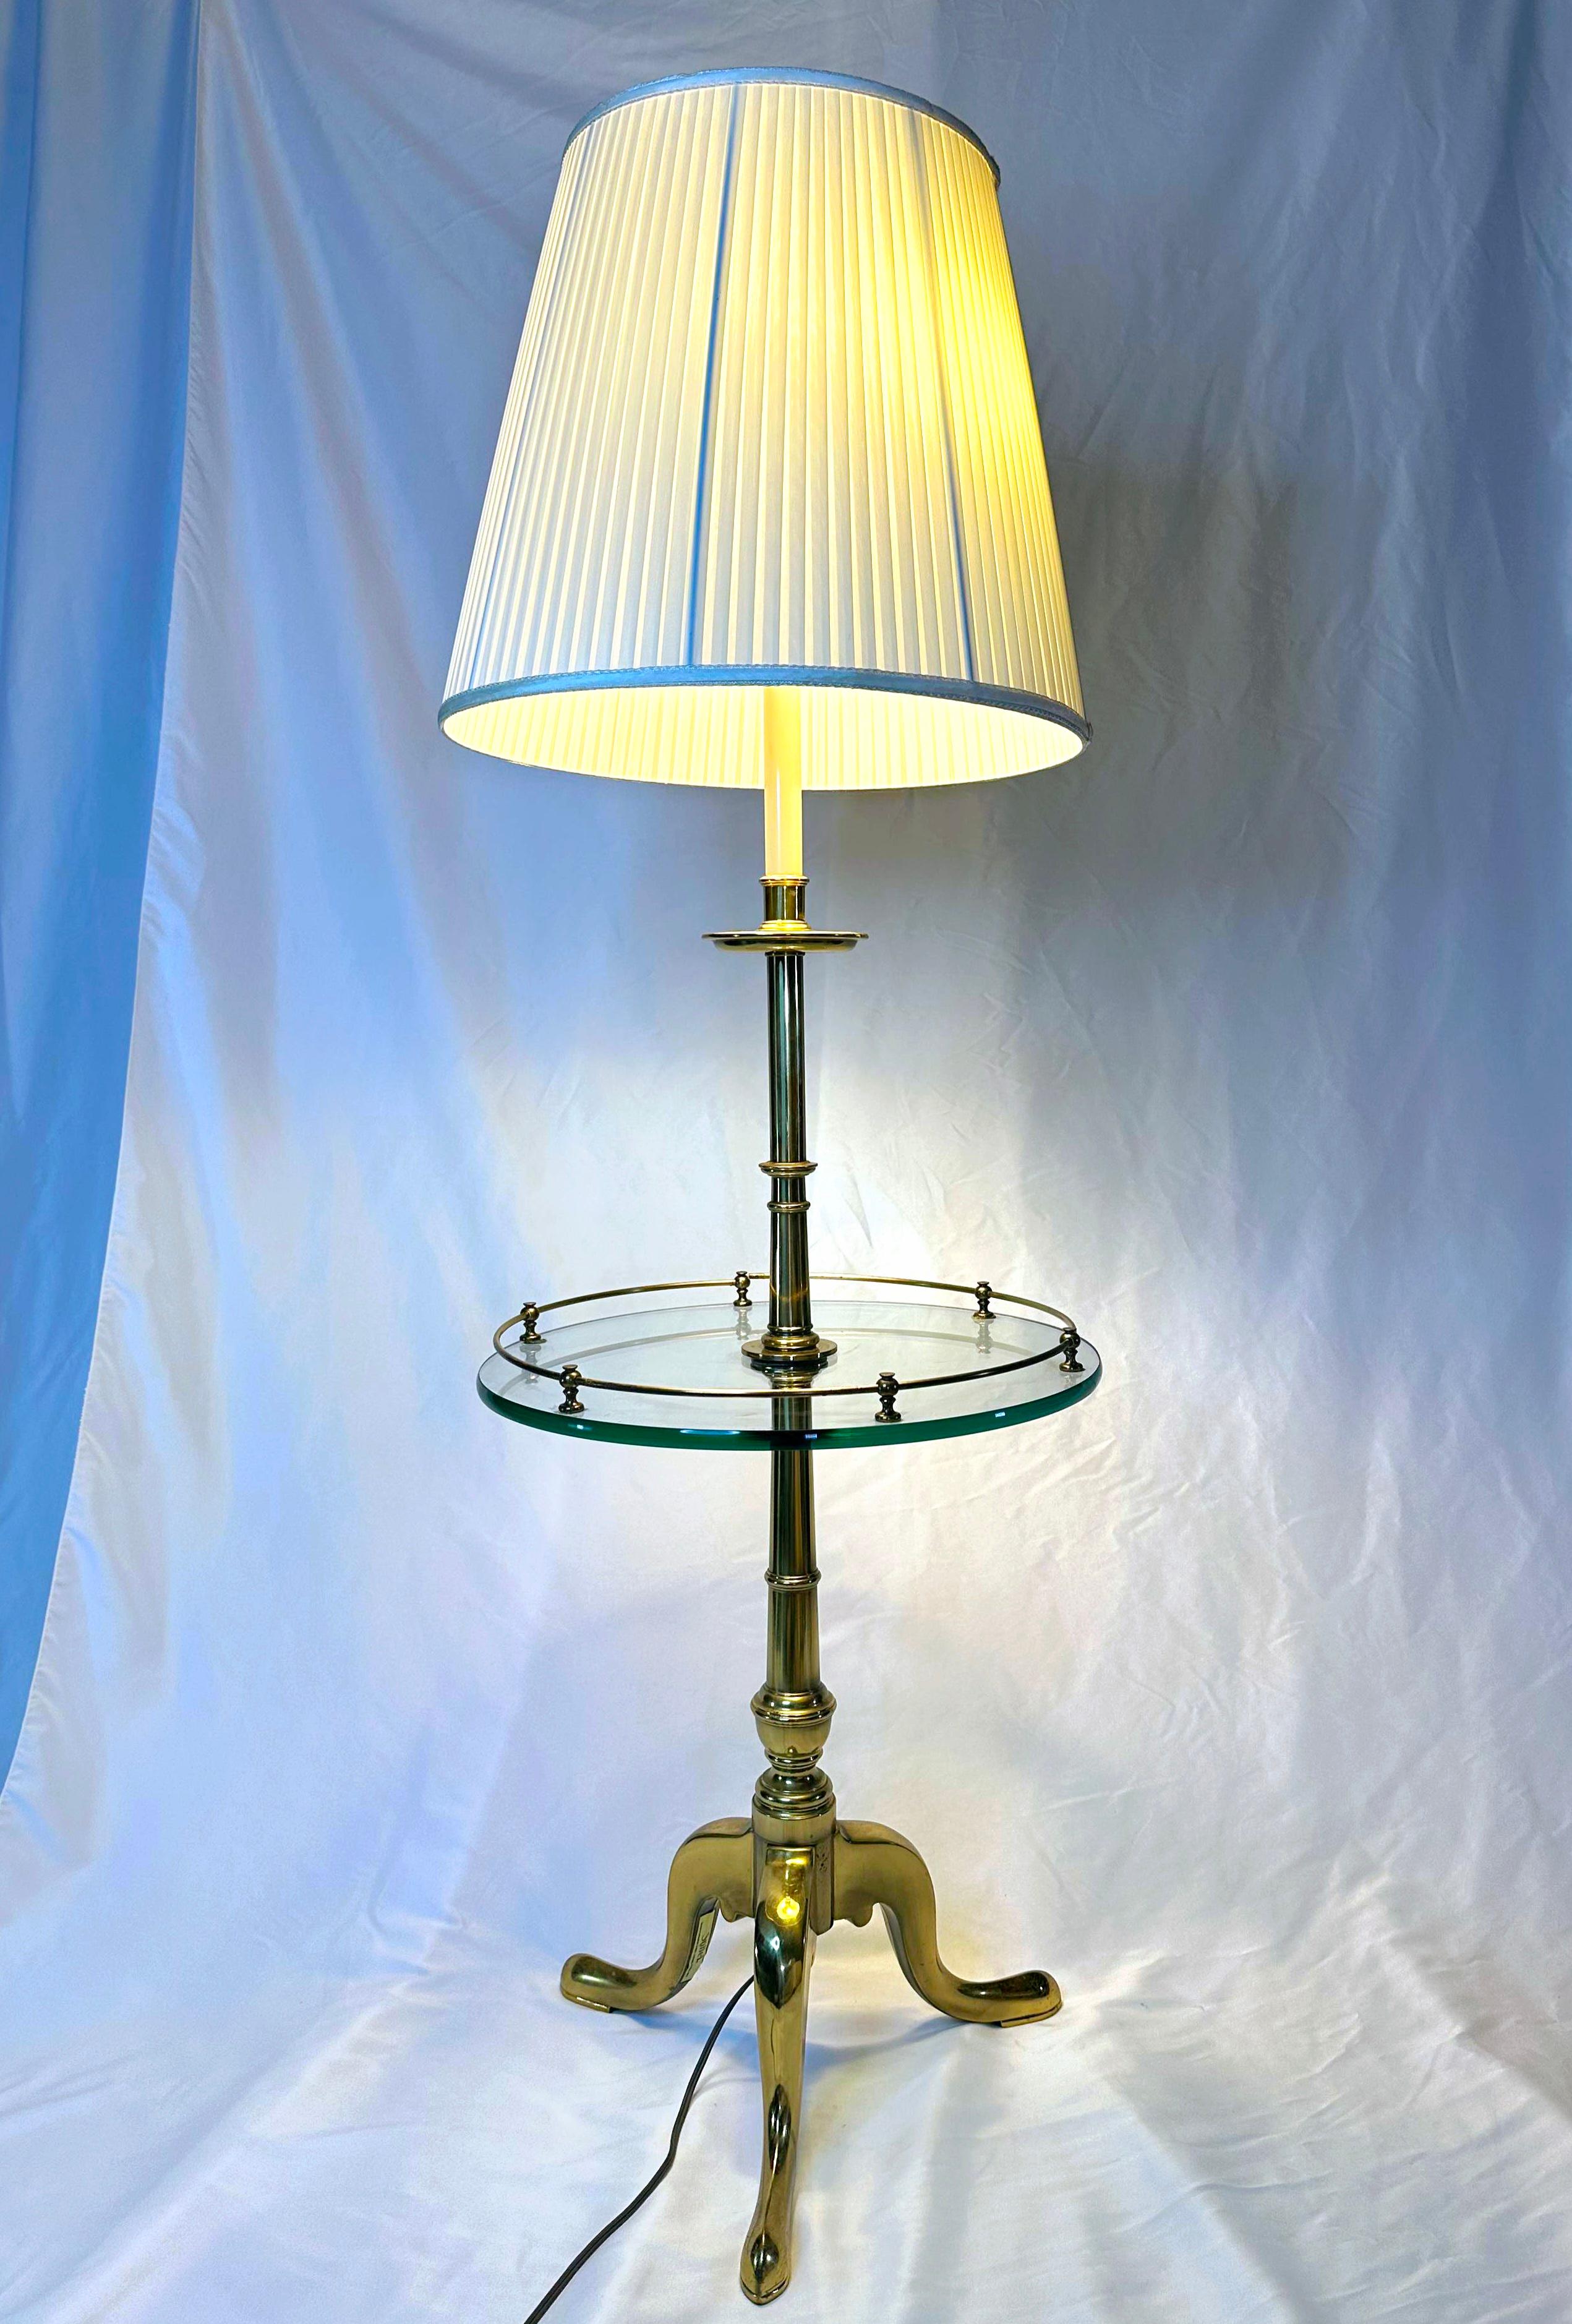 French Provincial Stiffel Floor Lamp With Glass Table and tripod legs 16